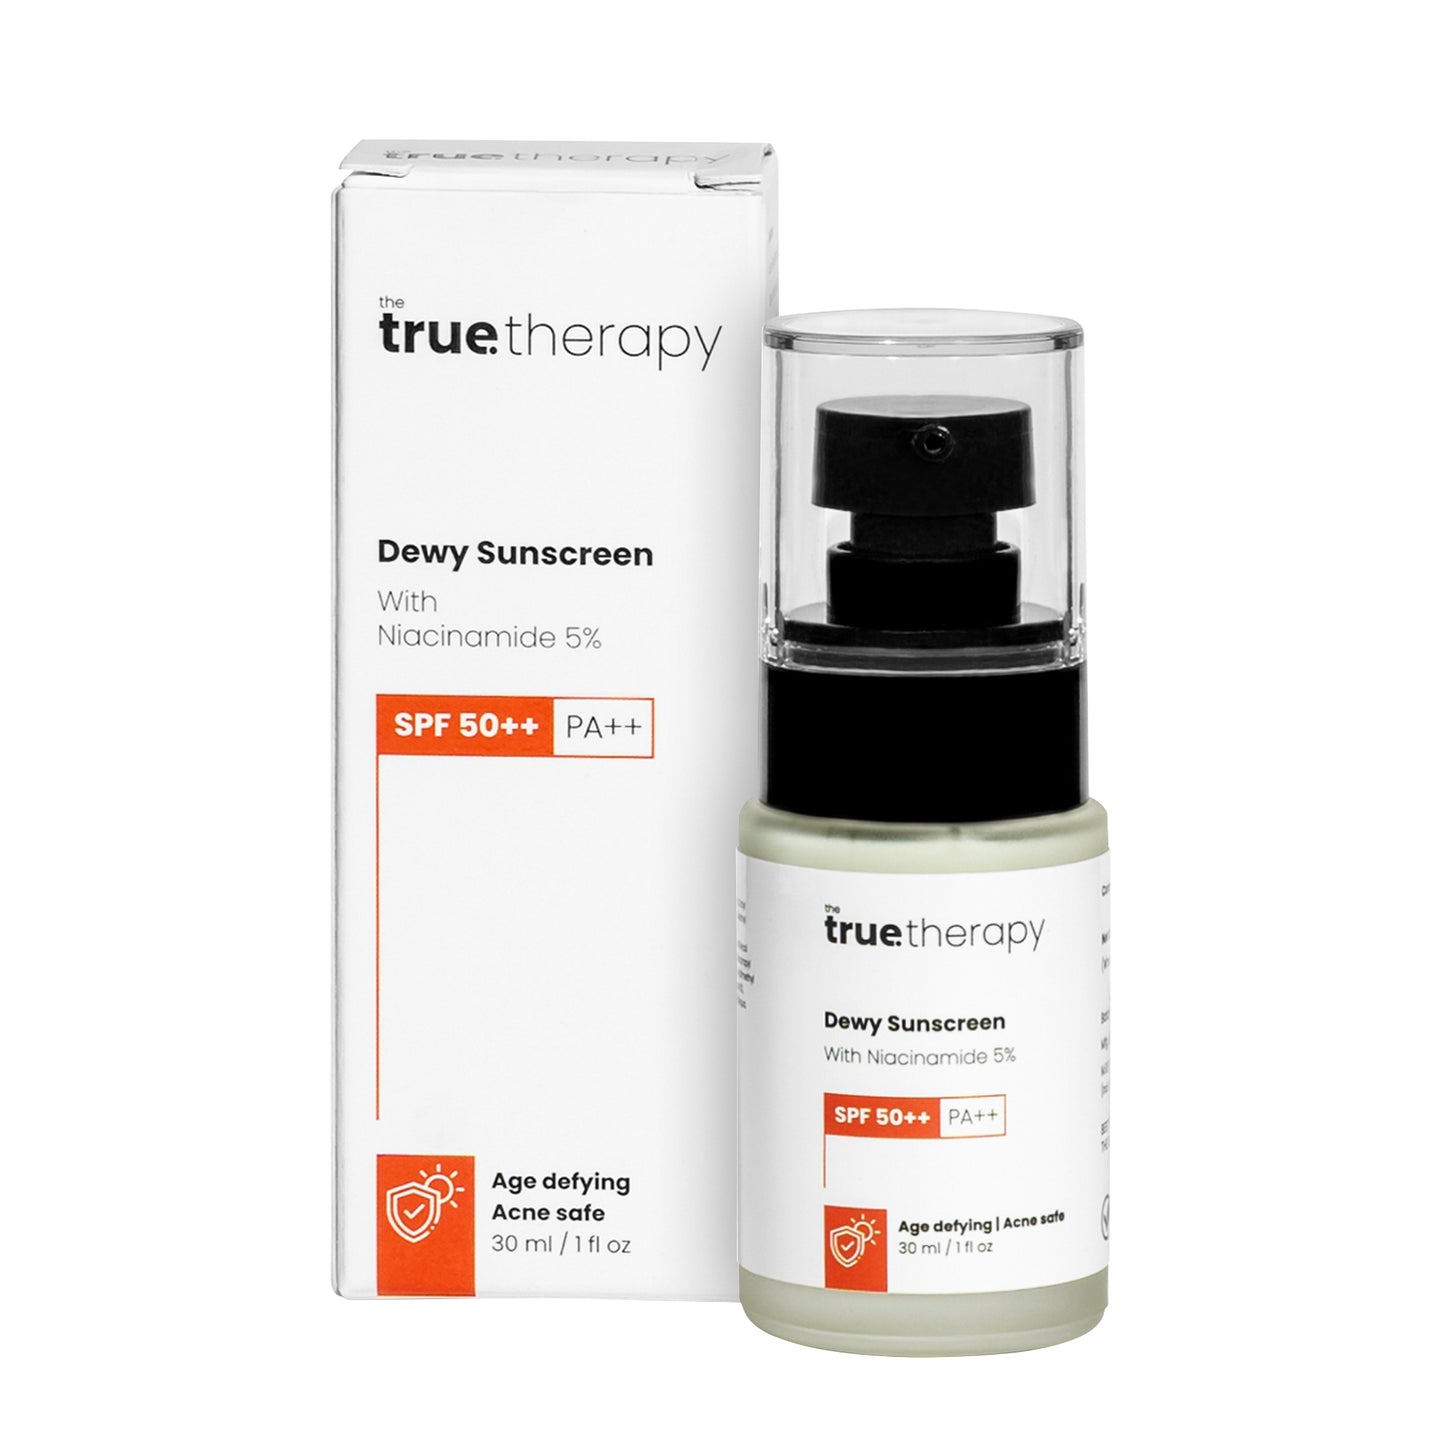 Dewy Sunscreen  & Niacinamide 5% - The True Therapy